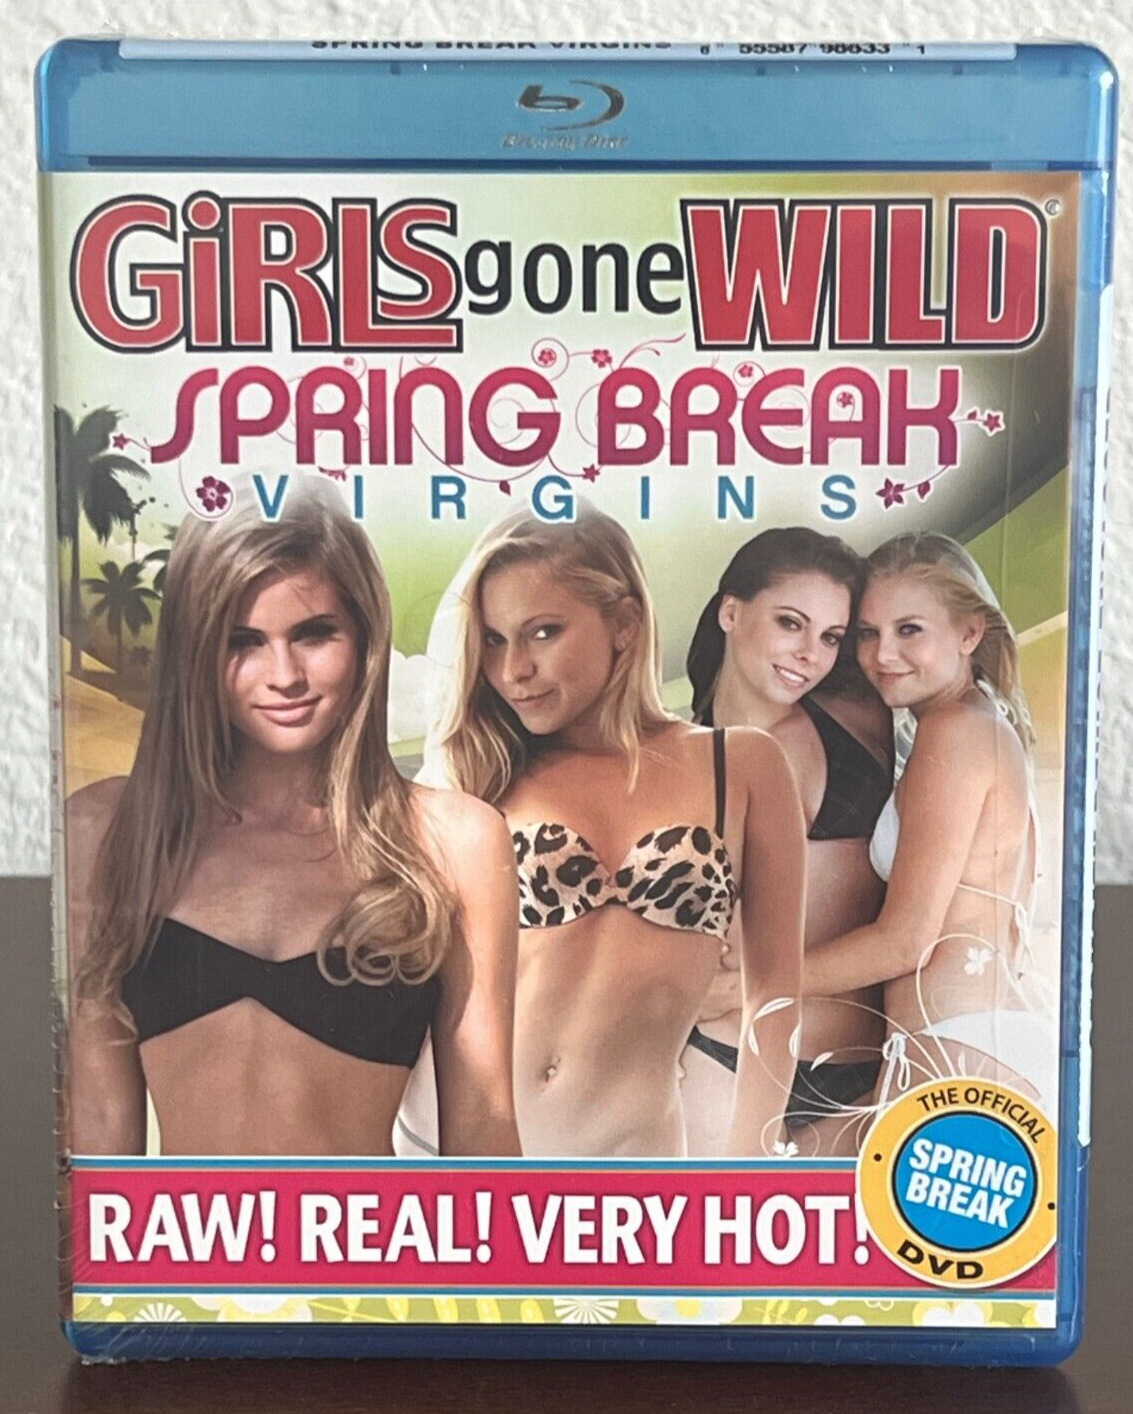 New Collectible Item Wild Rare Gone Out of Print Girls